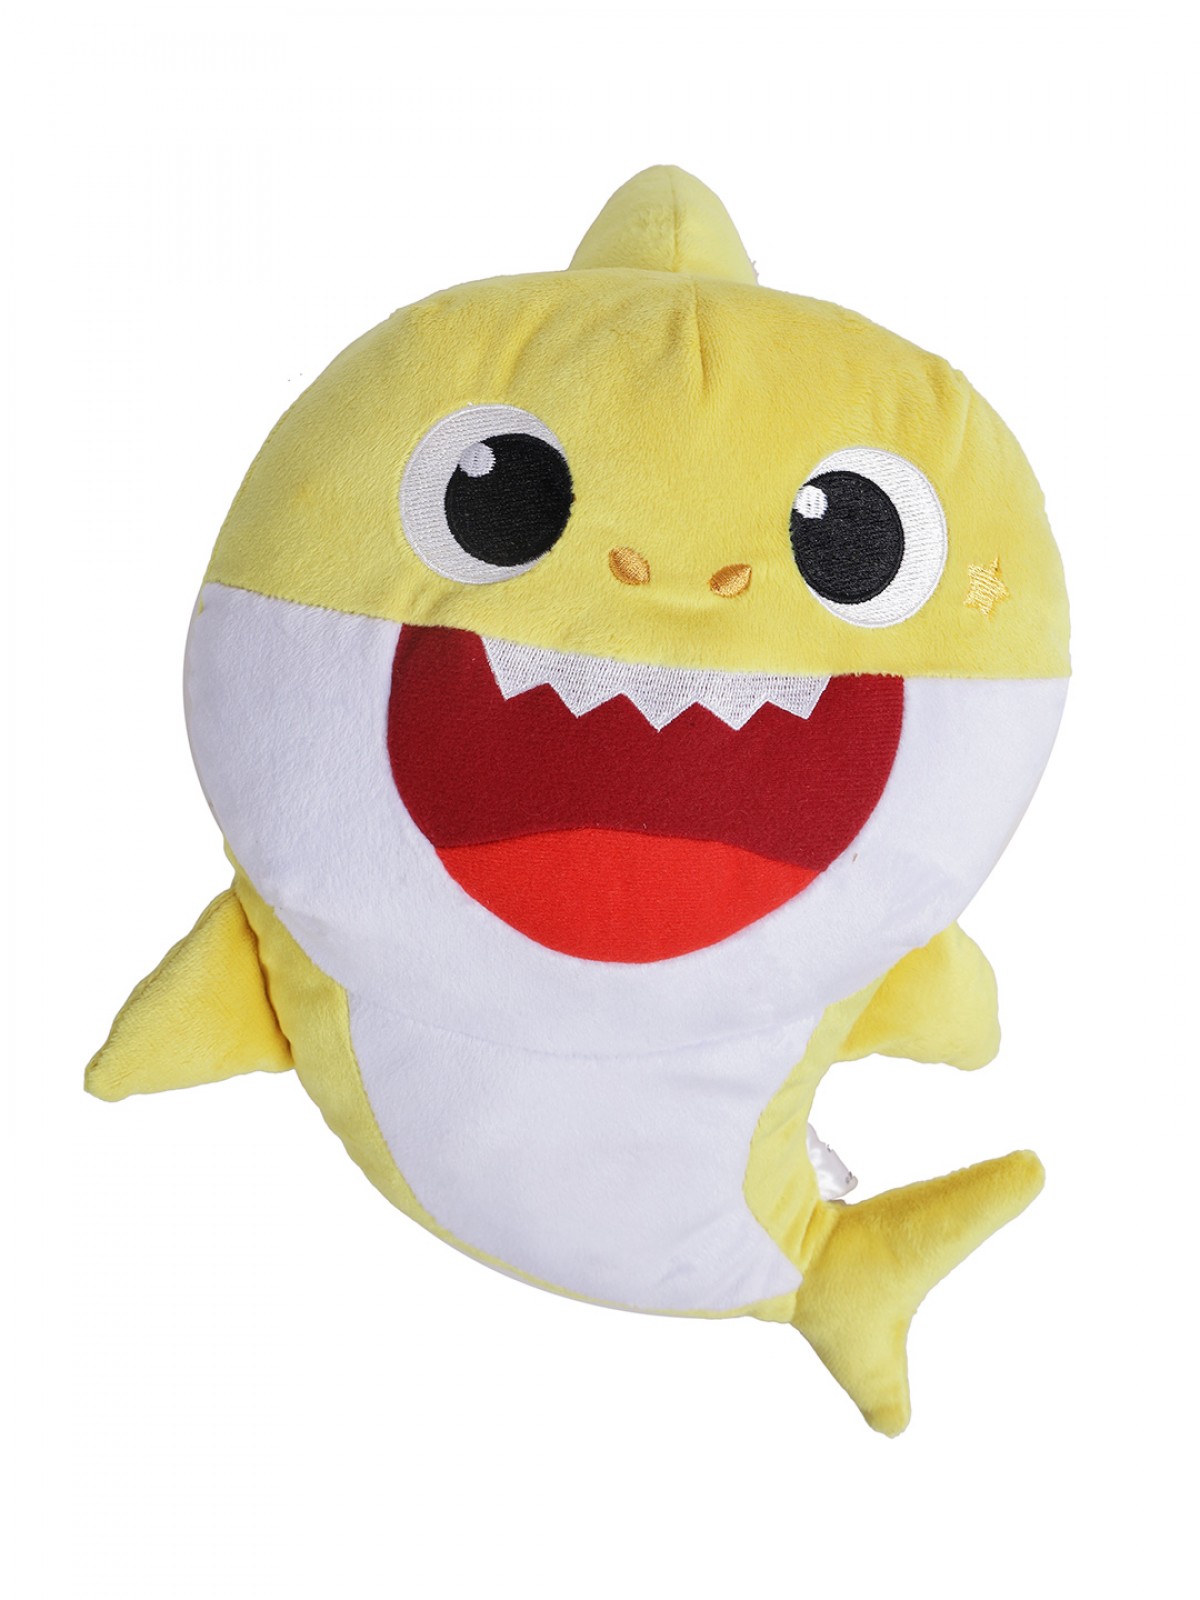 Baby Shark Plush Singing Plush Toy 8 Inch Baby Shark for 1 Year and Above